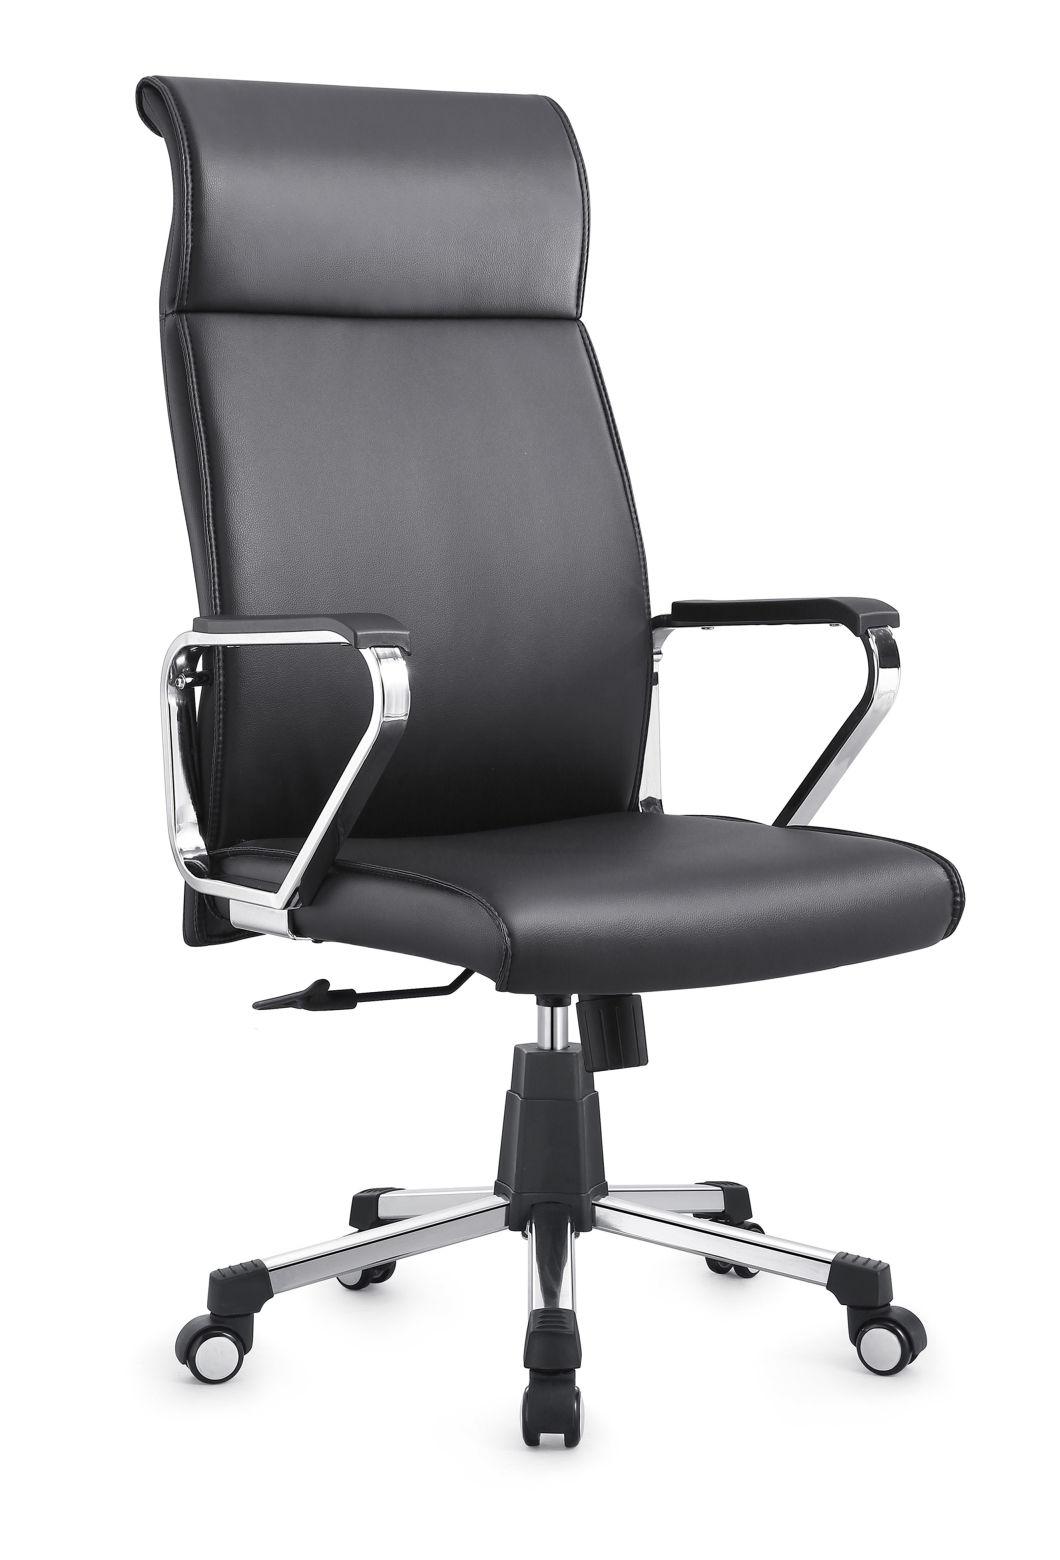 Leather PU Office Visitor Chair PU Leather Conference Office Chair for Meeting Room-2028b